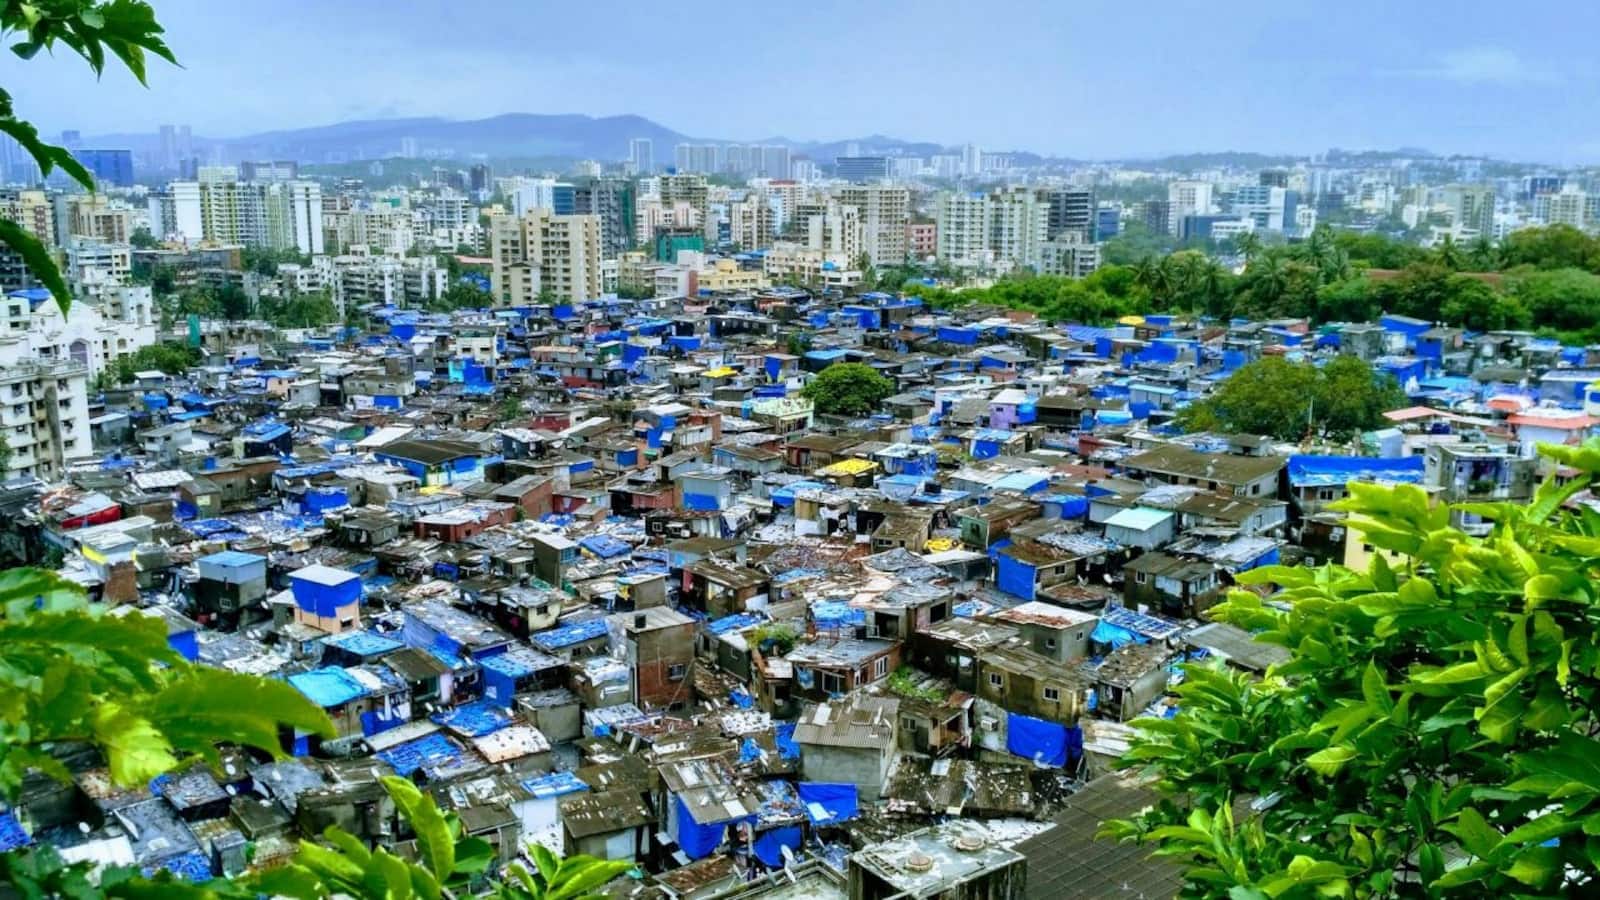 Maharashtra to invite fresh bids, offer more concessions for Dharavi redevelopment project